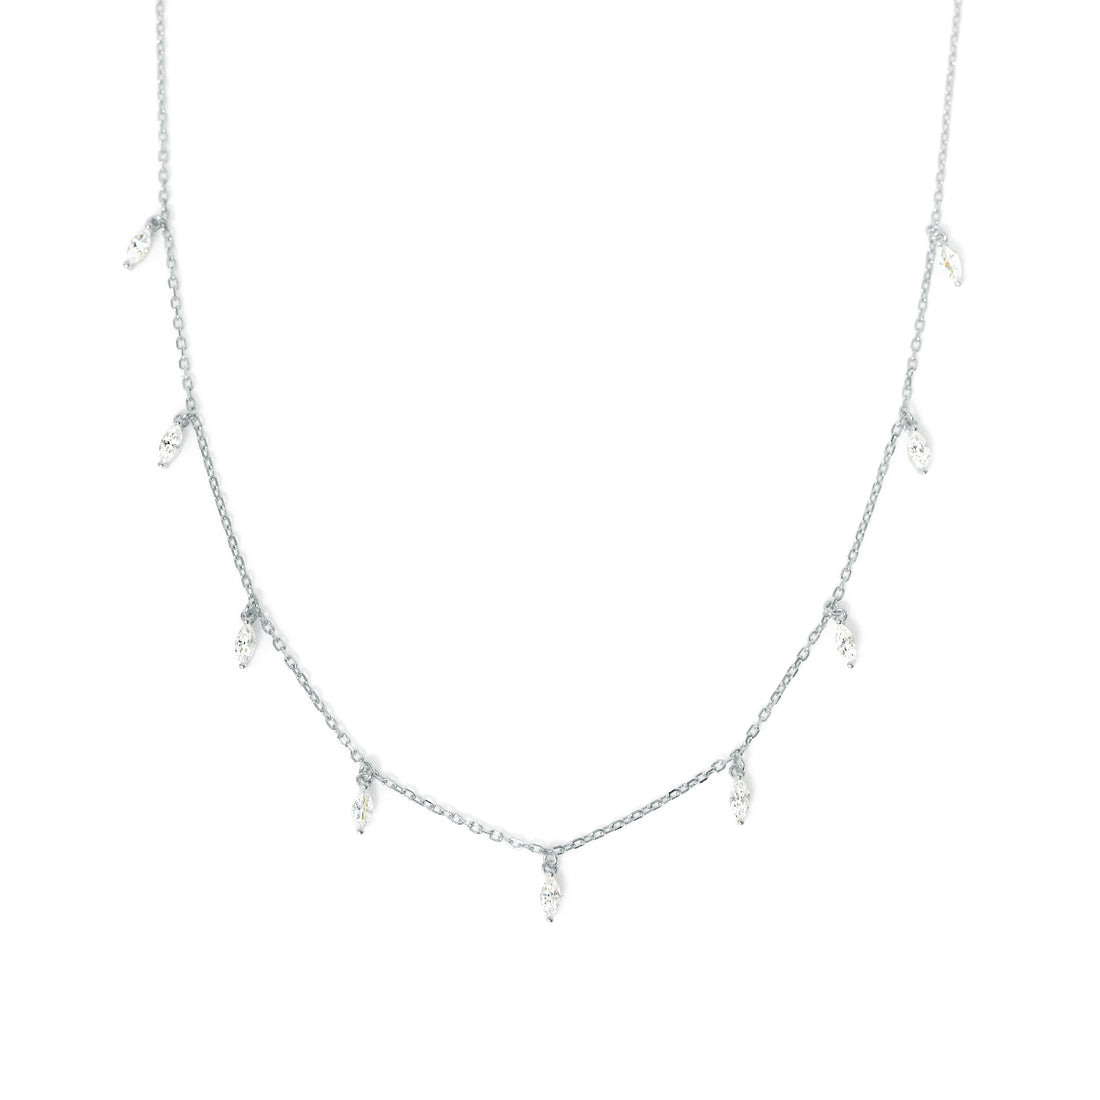 Sparkling Silver Zircon Necklace - 925 Chain with Charm Pendant for Elegant Ladies